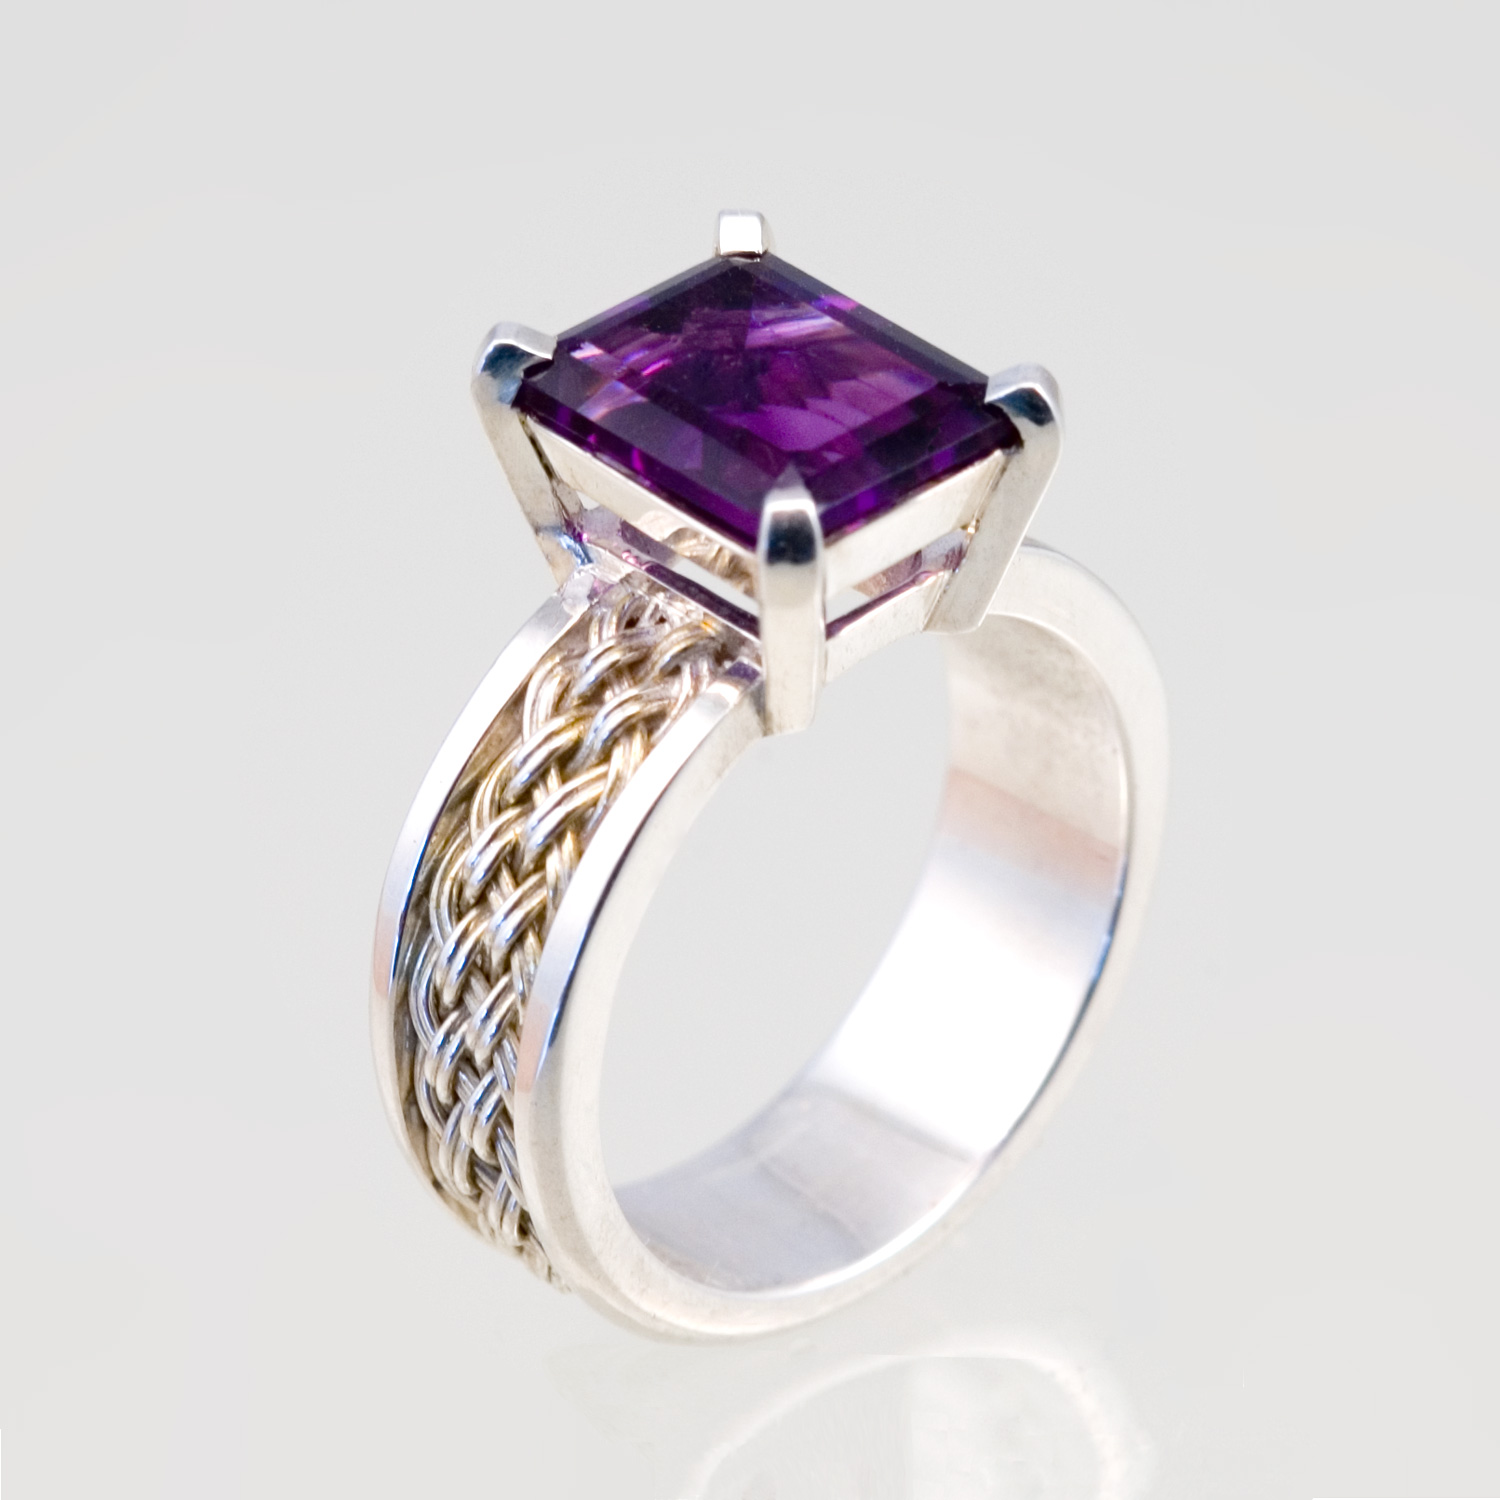 Emerald Cut Amethyst Ring in sterling silver with inset weave by Tamberlaine